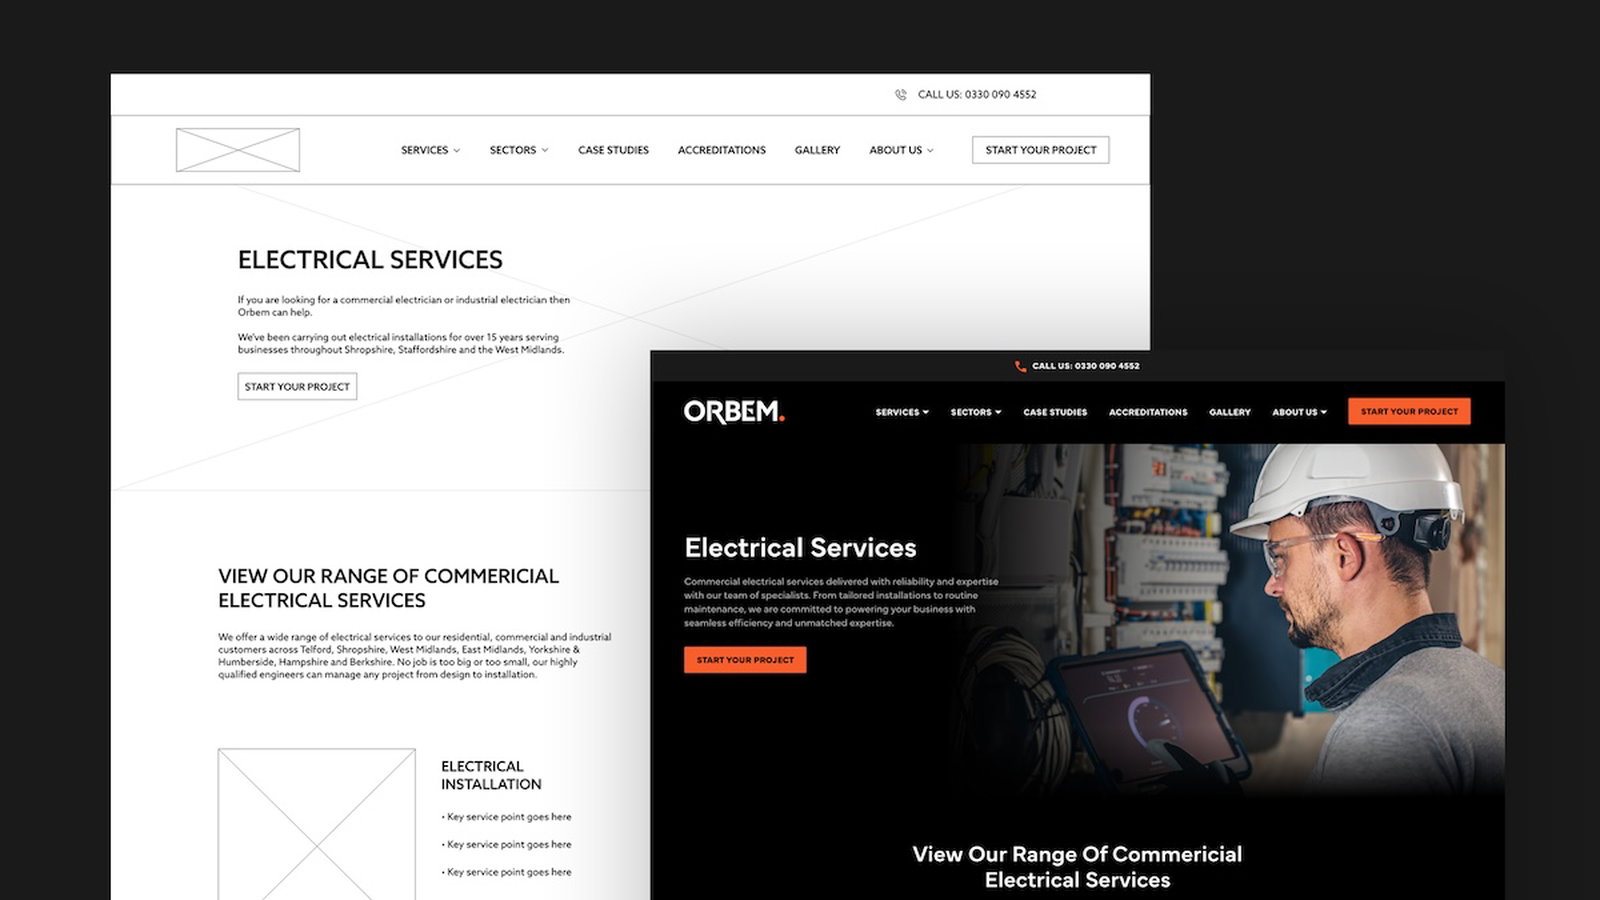 Wireframe designs of the Orbem specialist electrical website.